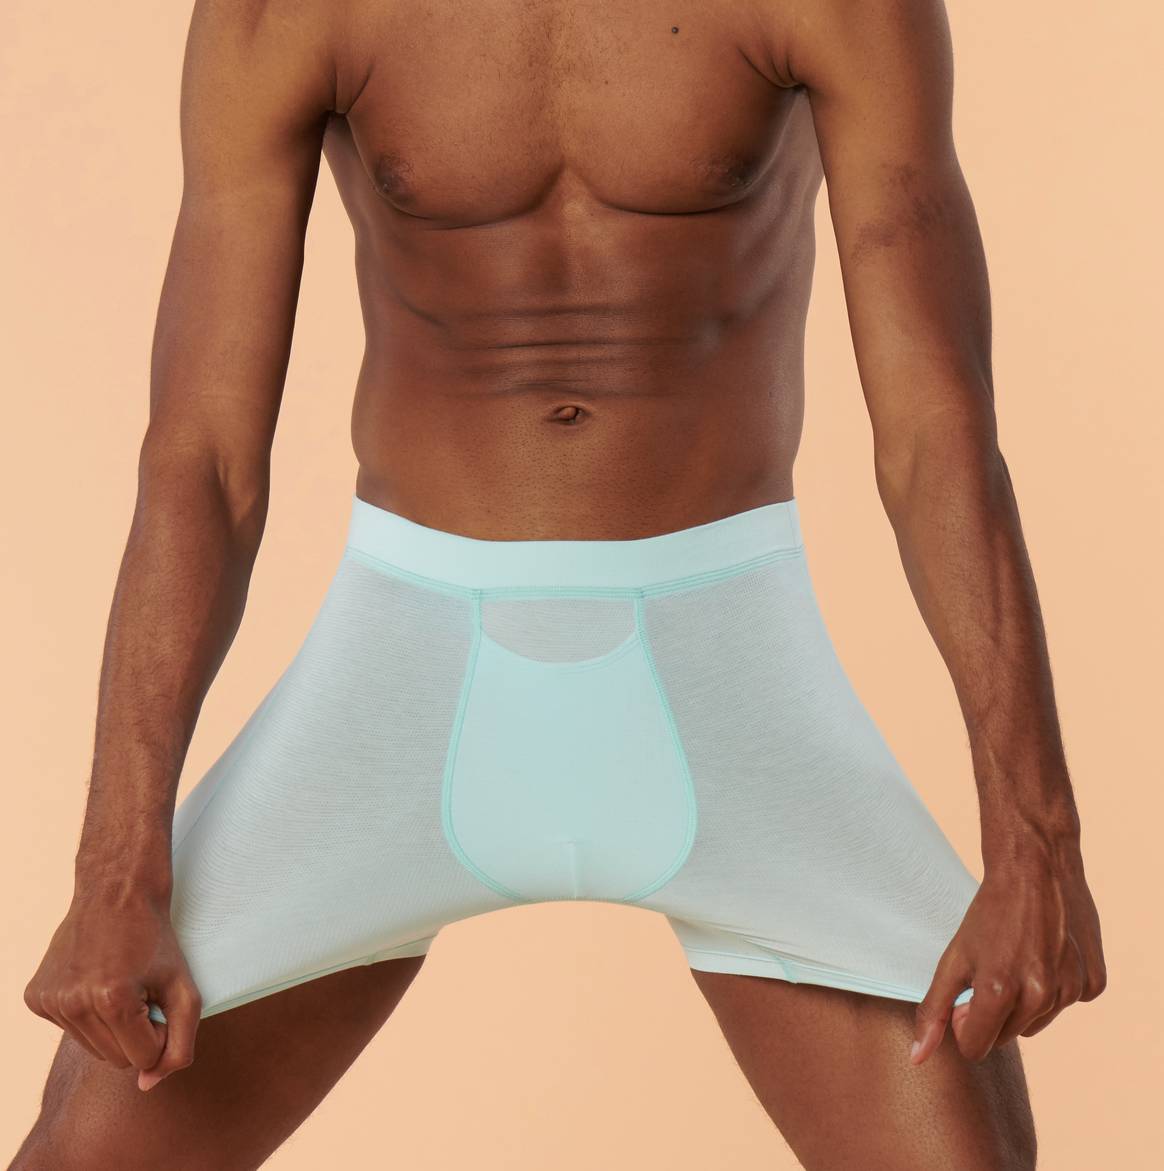 Gilly Hicks Mens underwear try on sexy seamless 